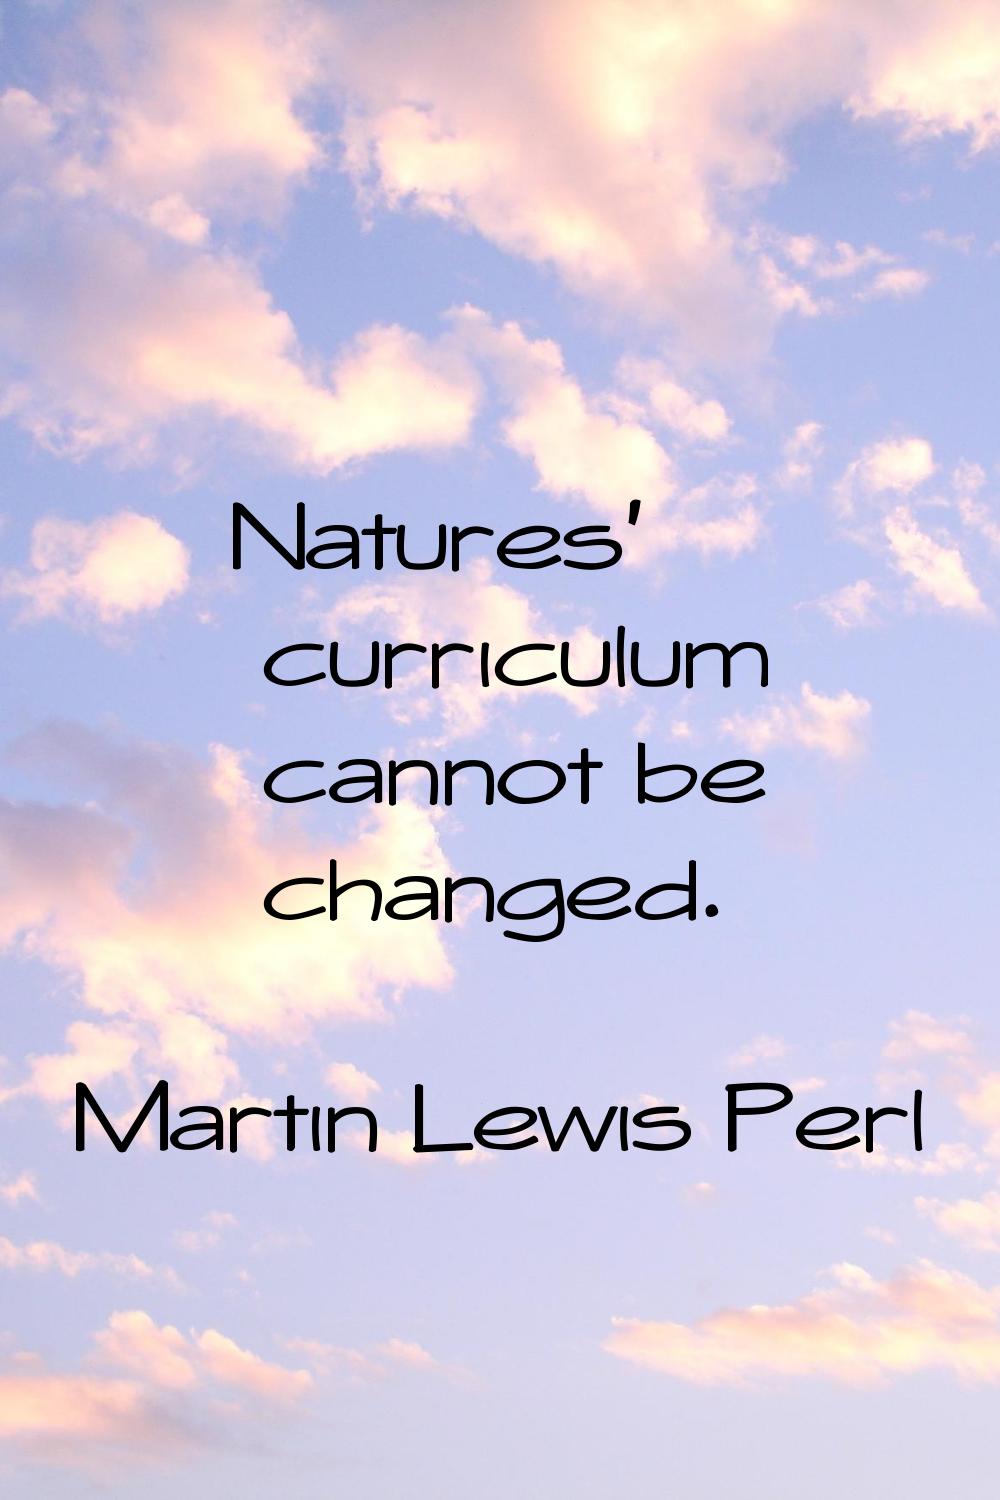 Natures' curriculum cannot be changed.